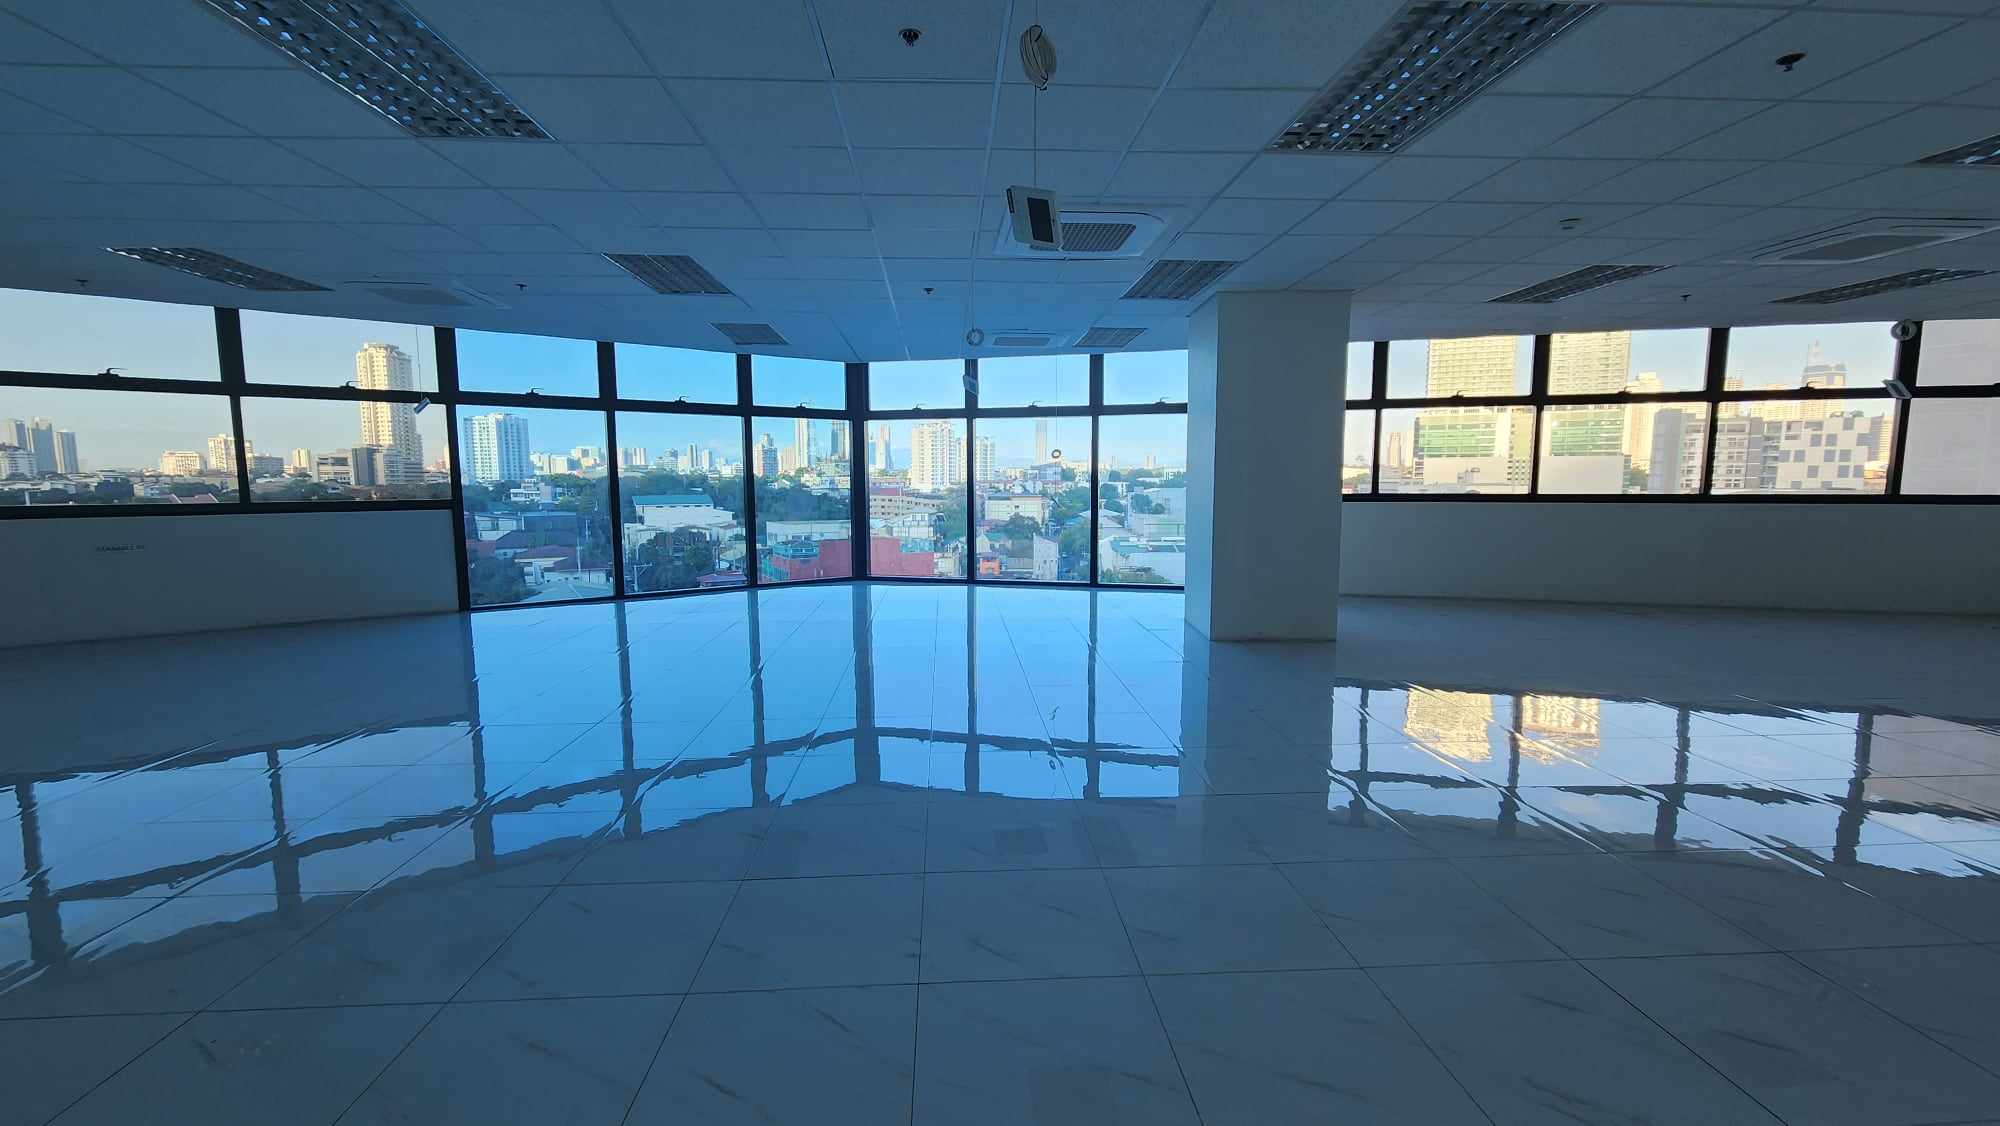 For Rent Lease Office Space Mandaluyong City Manila 2020 sqm